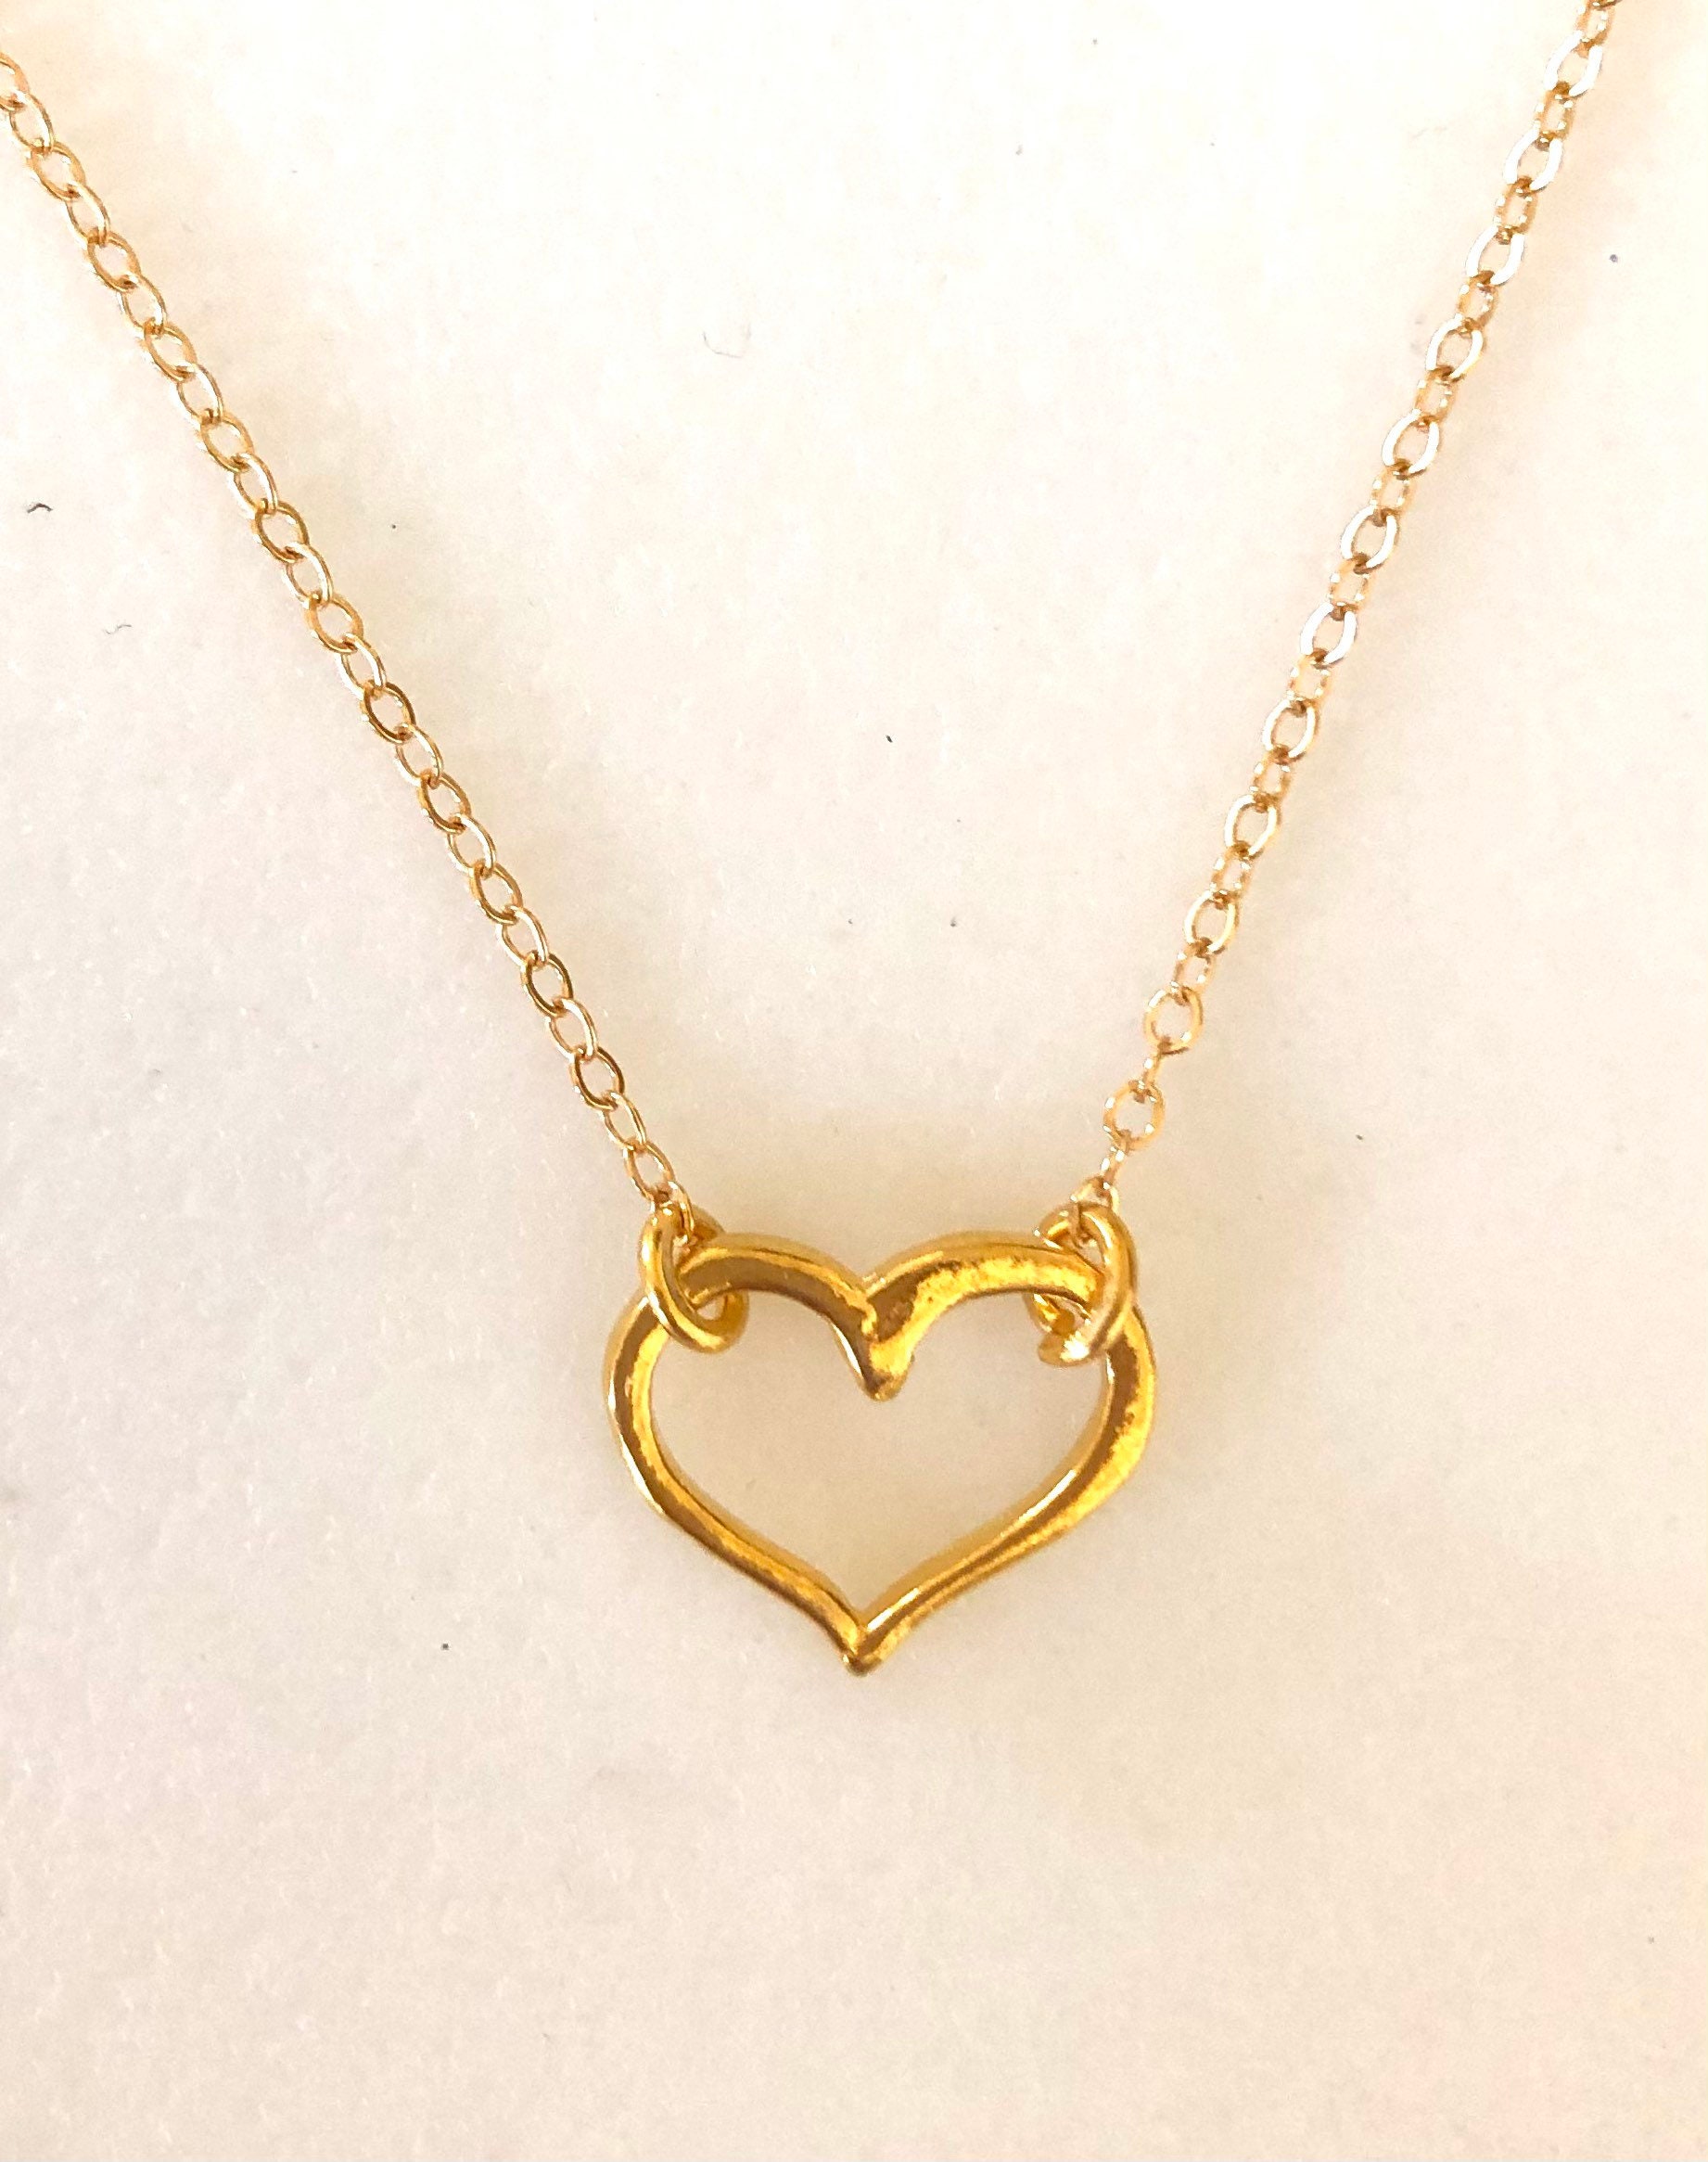 Open Heart Necklace, Petite Heart Pendant, Gold Vermeil, Sterling Silver,  Sweetheart Gift, Valentines Day - Etsy Denmark